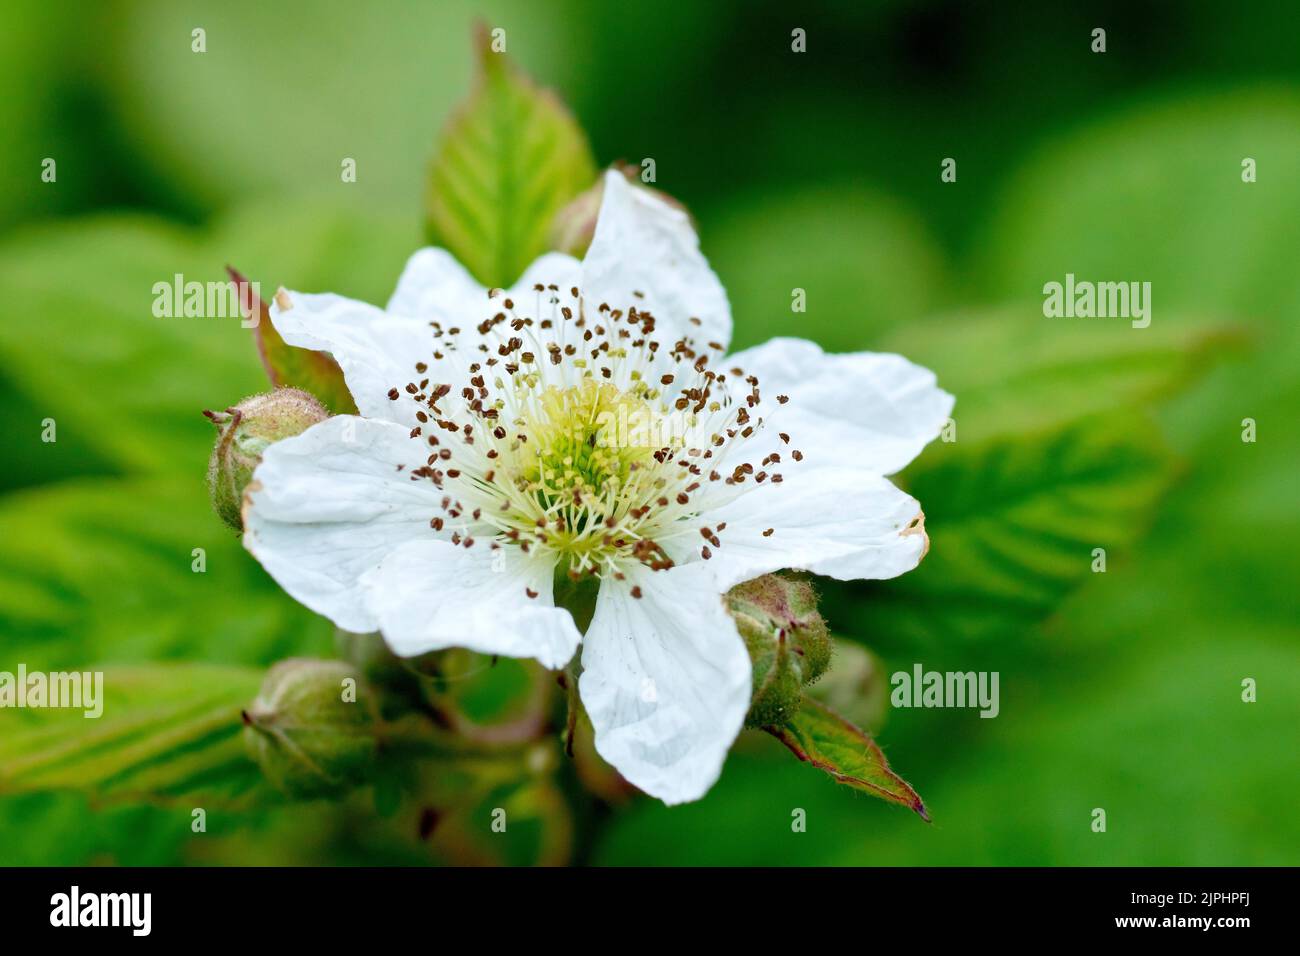 Bramble or Blackberry (rubus fruticosus), close up of single white flower of the common shrub with several buds still waiting to open. Stock Photo